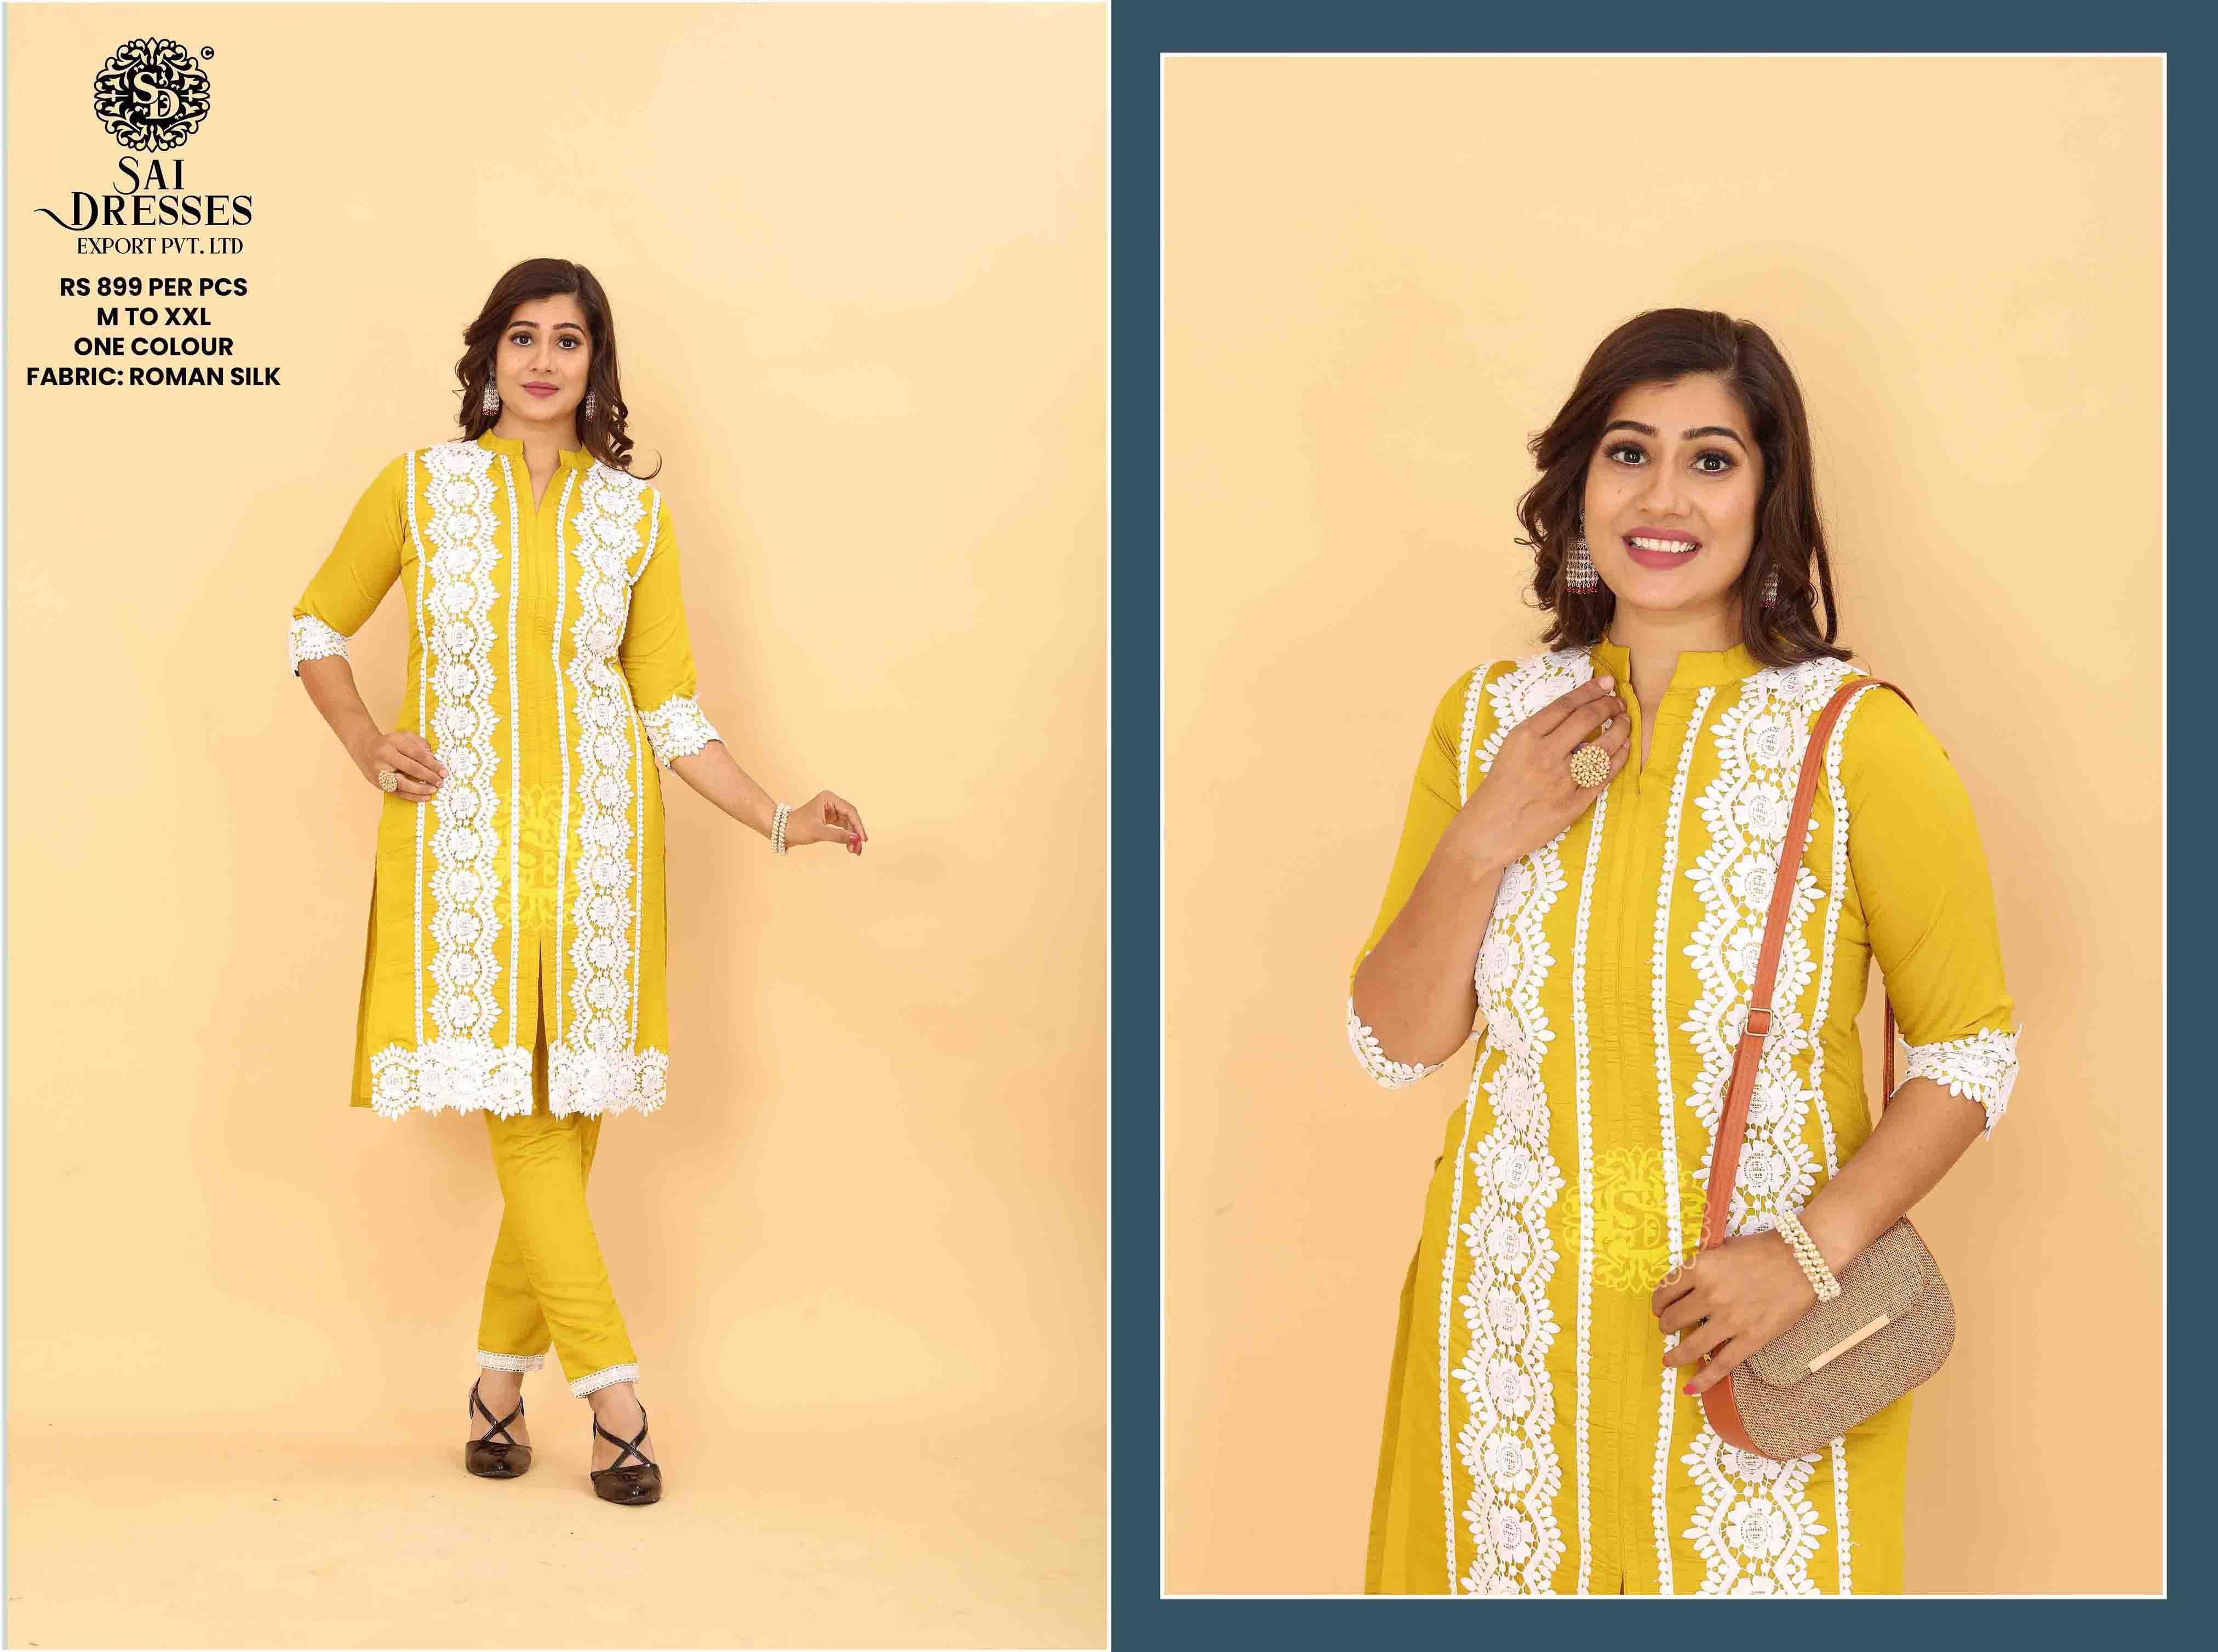 SAI DRESSES PRESENT D.NO SD 5025 READY TO TRENDY WEAR ROMAN SILK DESIGNER KURTI WITH PANT COMBO COLLECTION IN WHOLESALE RATE IN SURAT